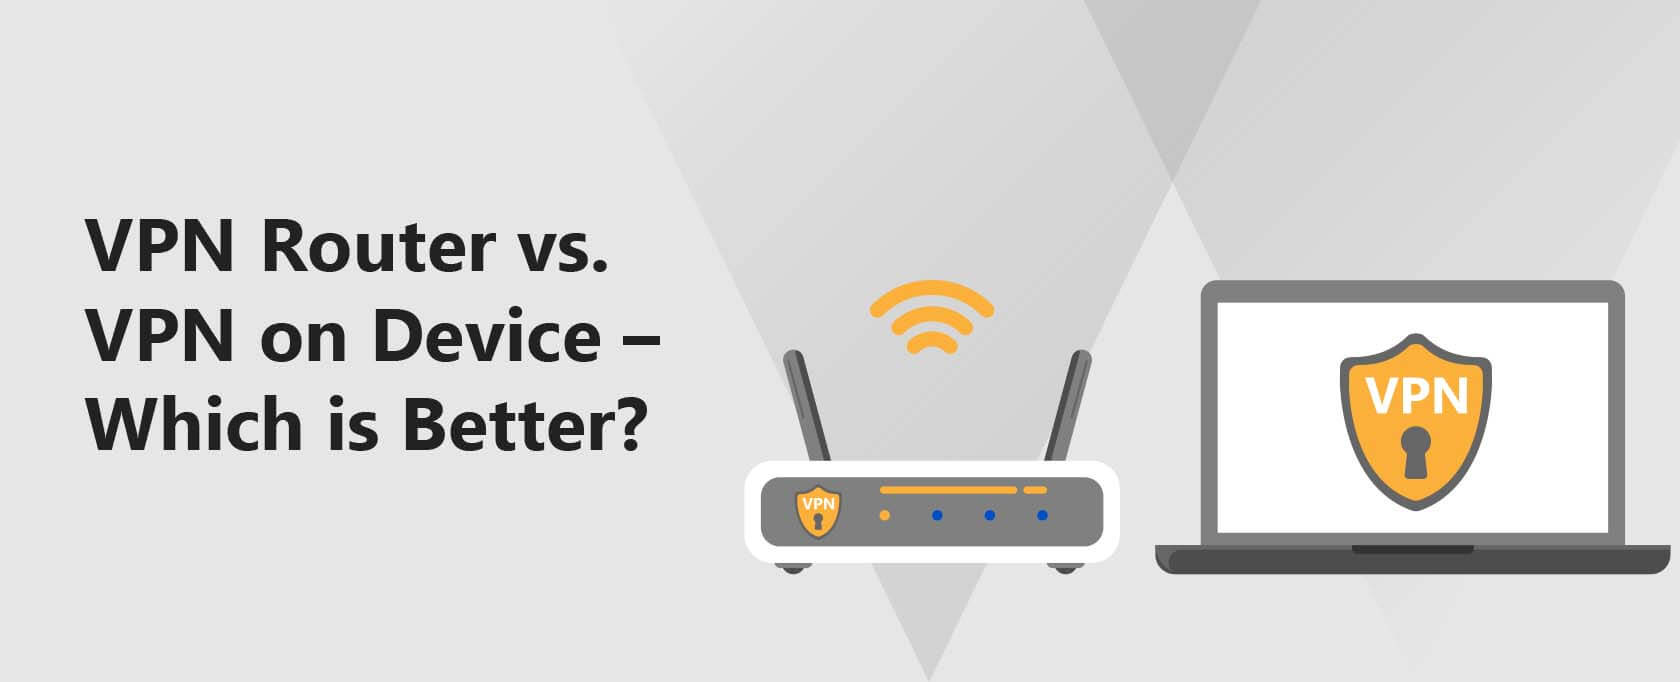 VPN Router vs. VPN on Device – Which is Better?